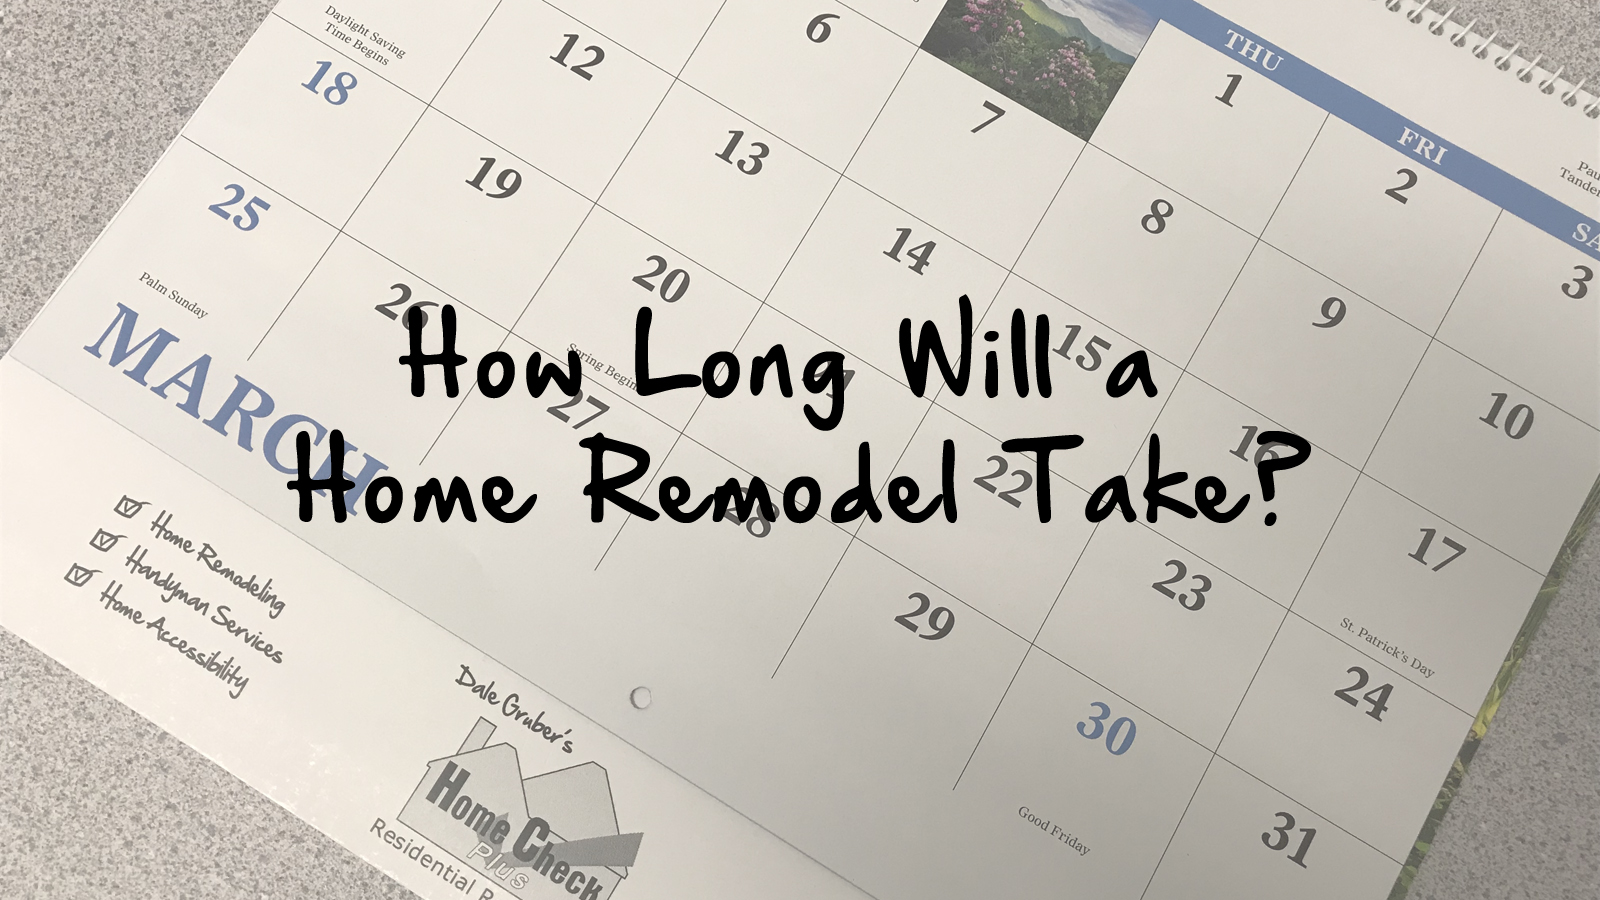 How long will a home remodel take